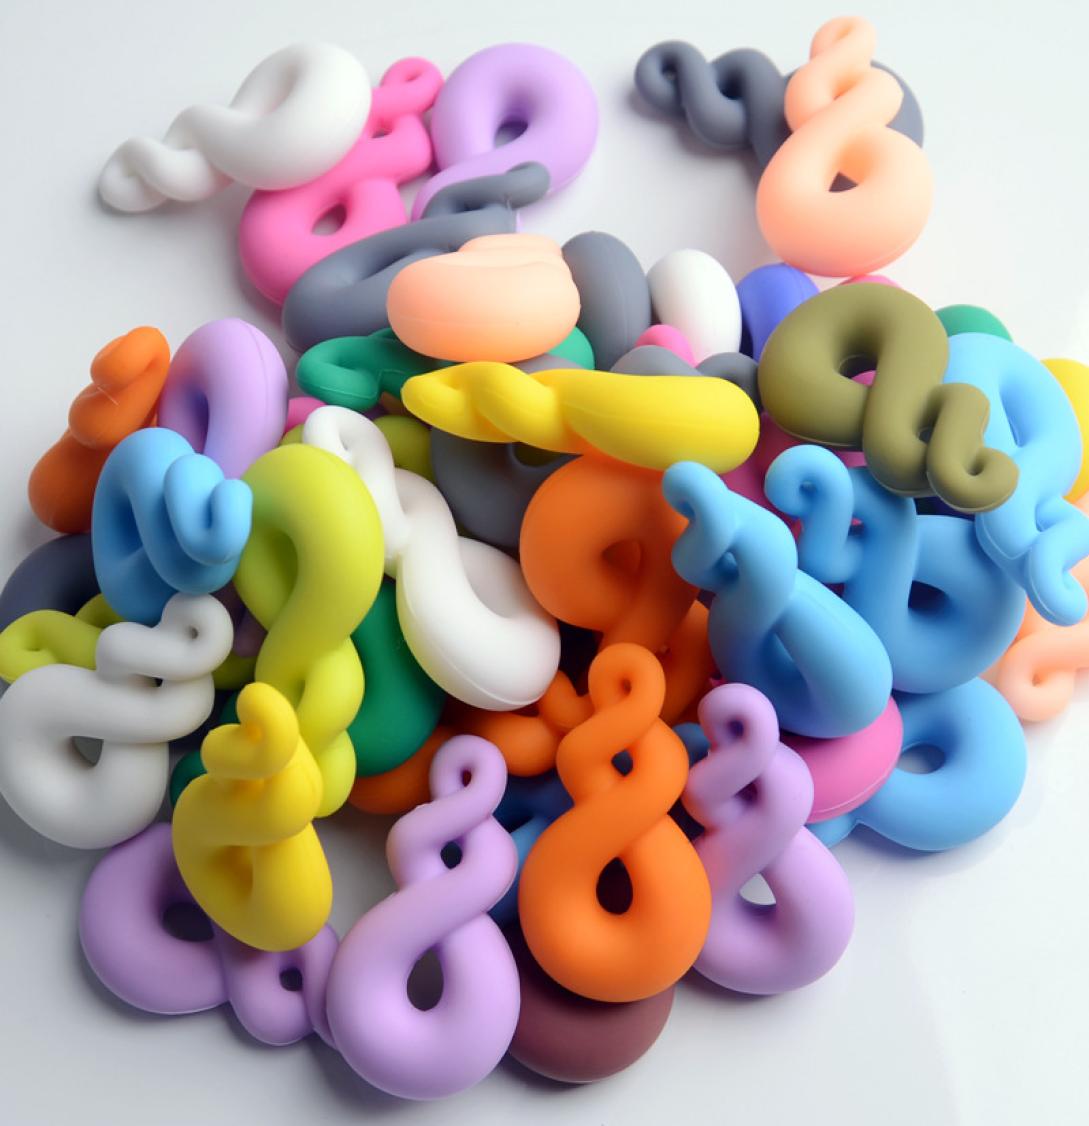 

Silicone Eight Shape Teether Food Grade Silicone Teething Pendant Necklace Baby Chewing Bead Safe Teether Toy Sensory Necklace4796894